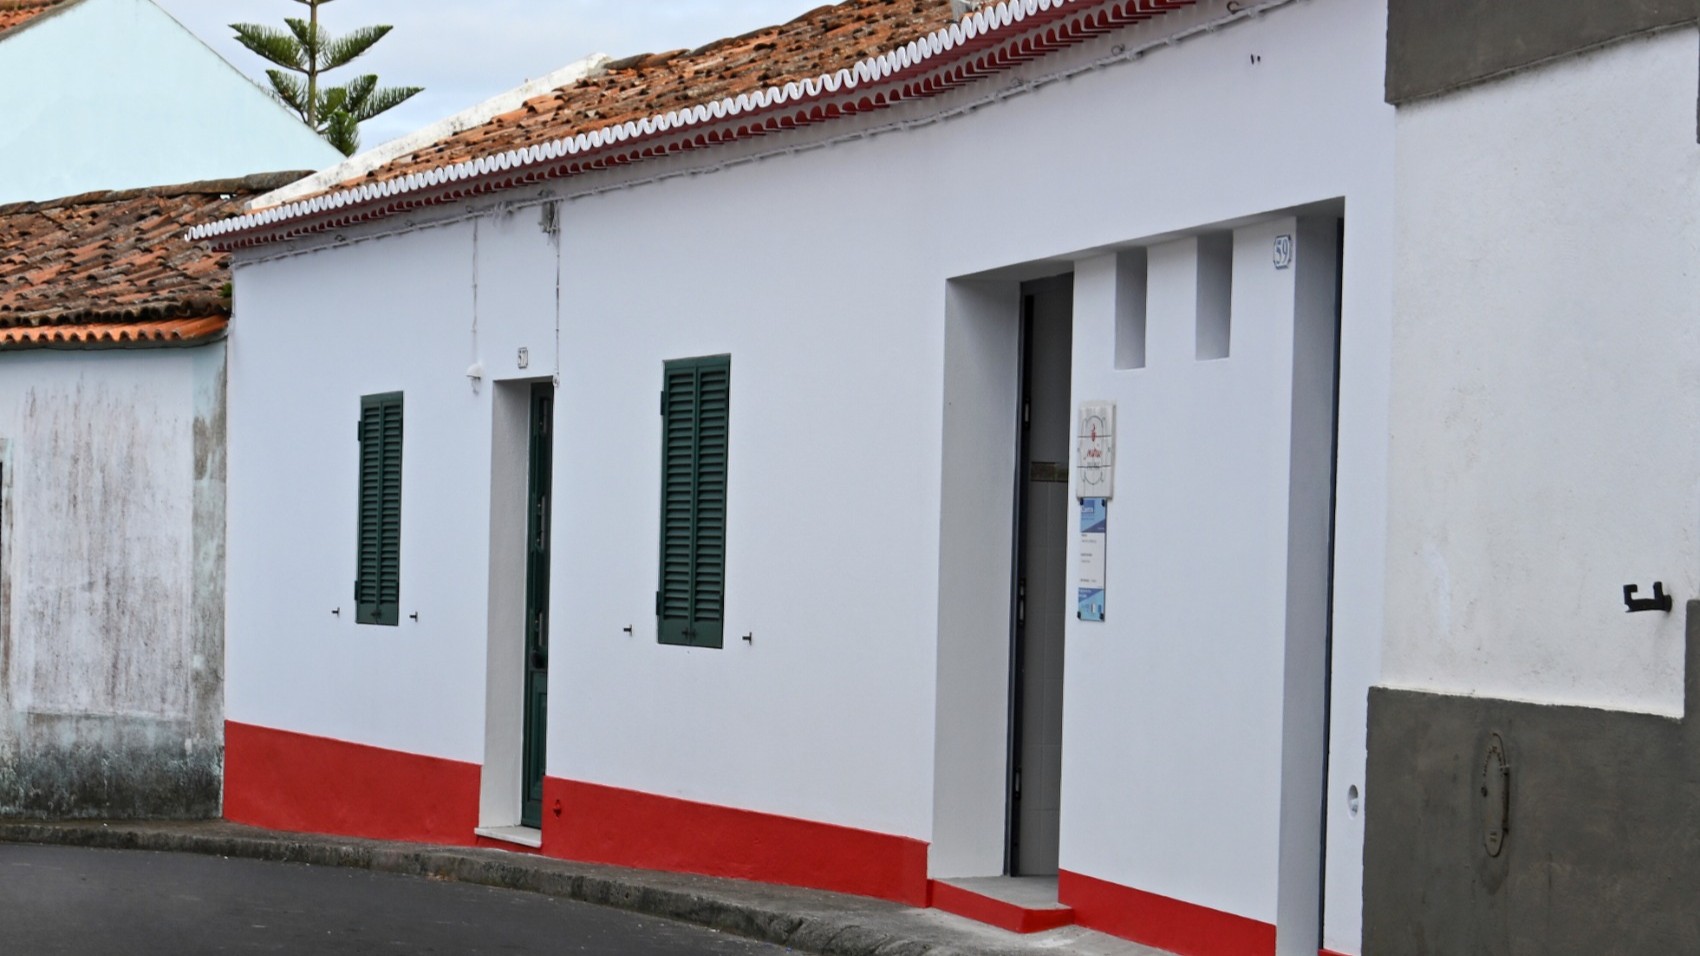 Azores-for-Foodies-cooking-class-house